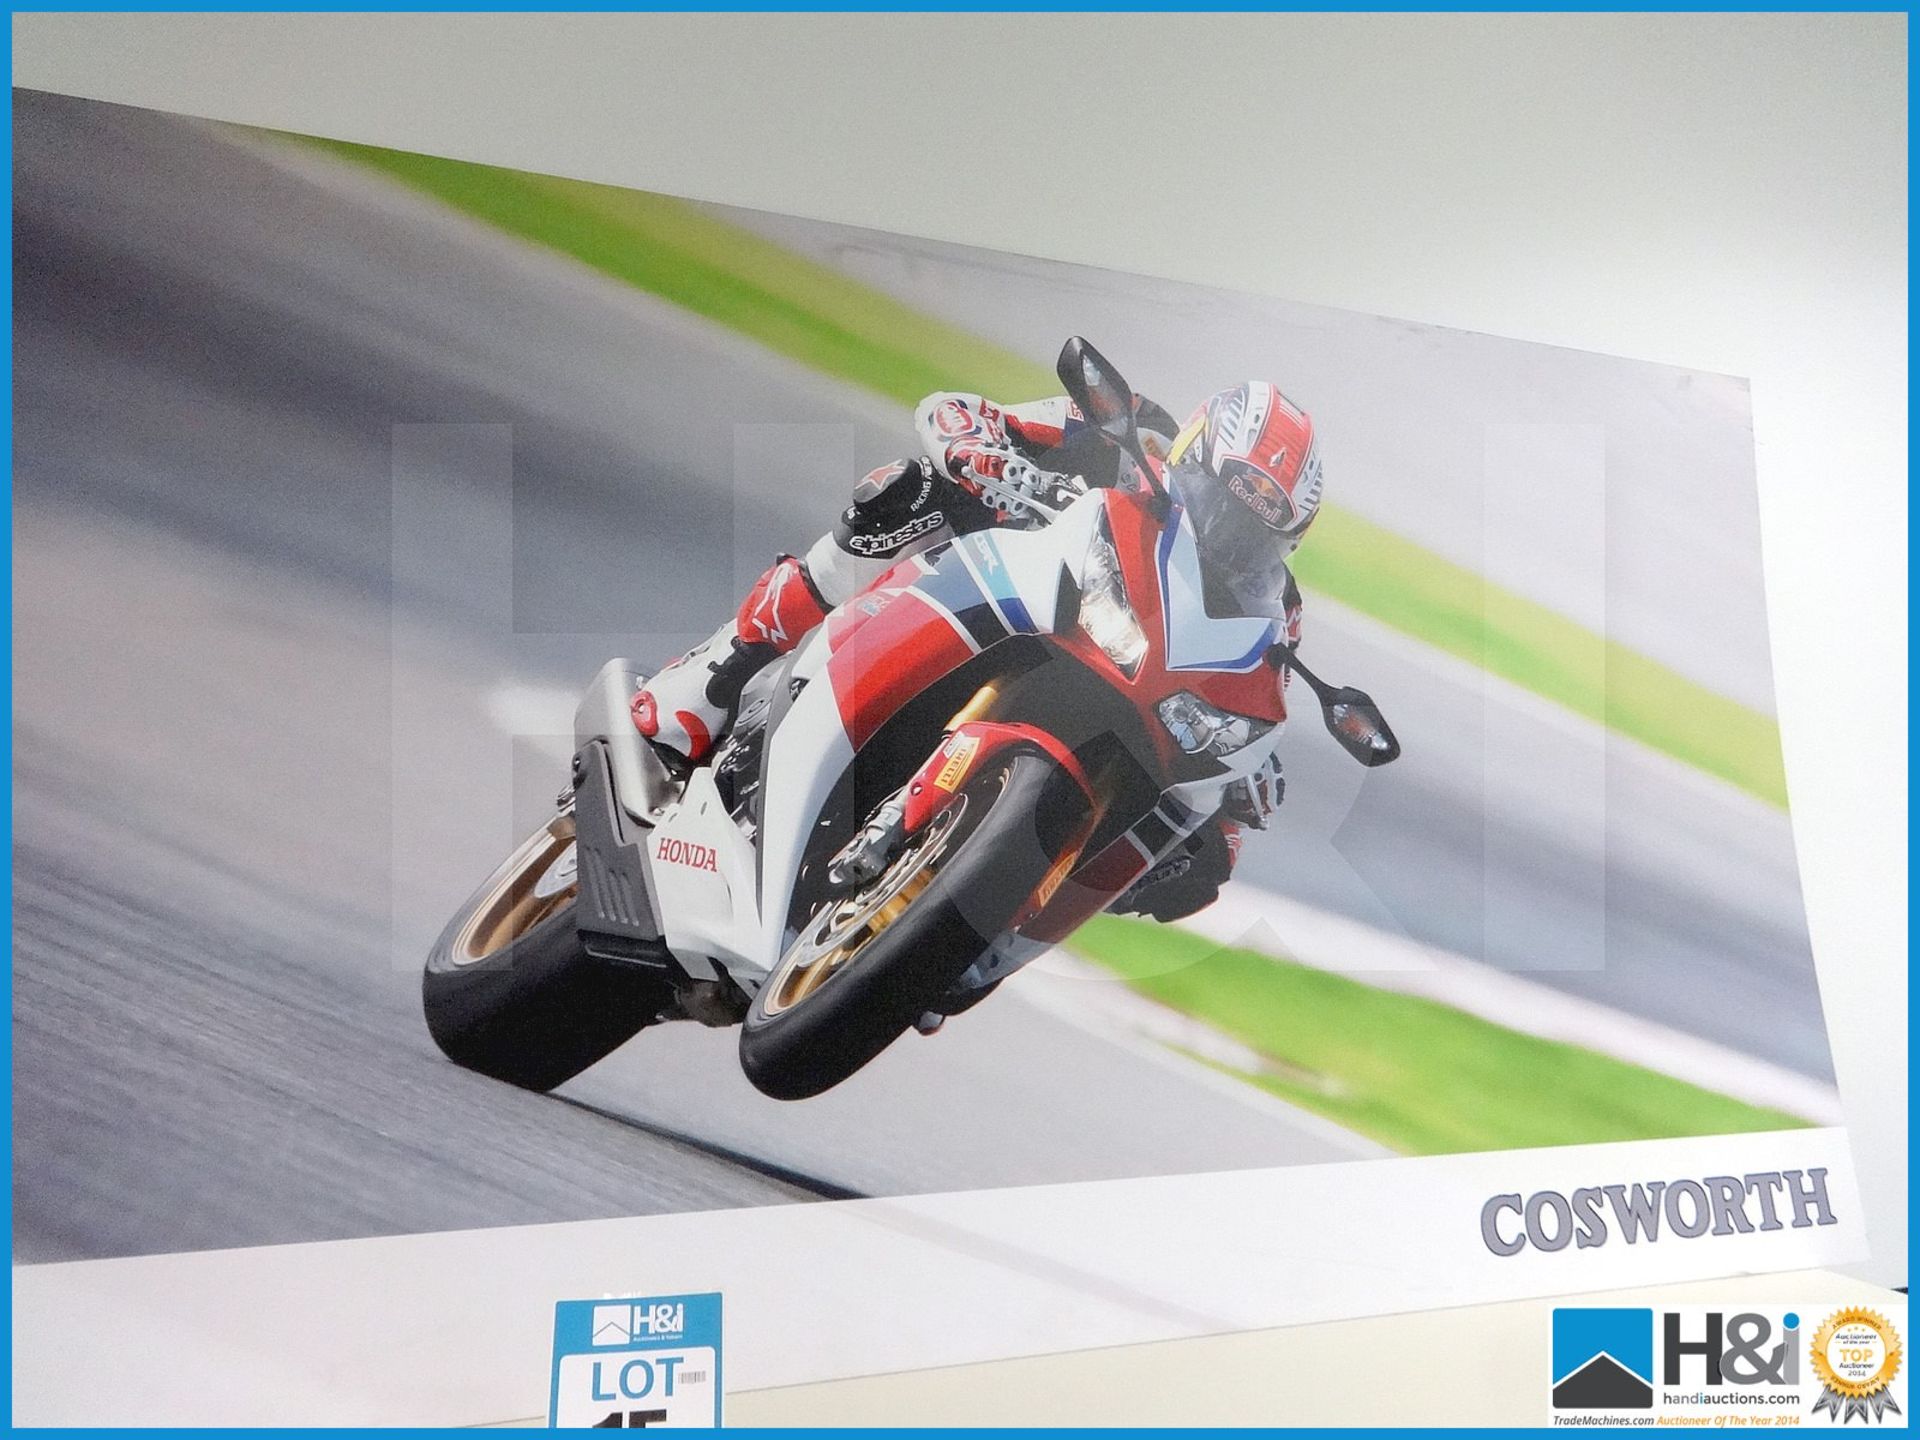 Large print of motorcycle branded Cosworth promo artwork. Never made available to the public before, - Image 4 of 4